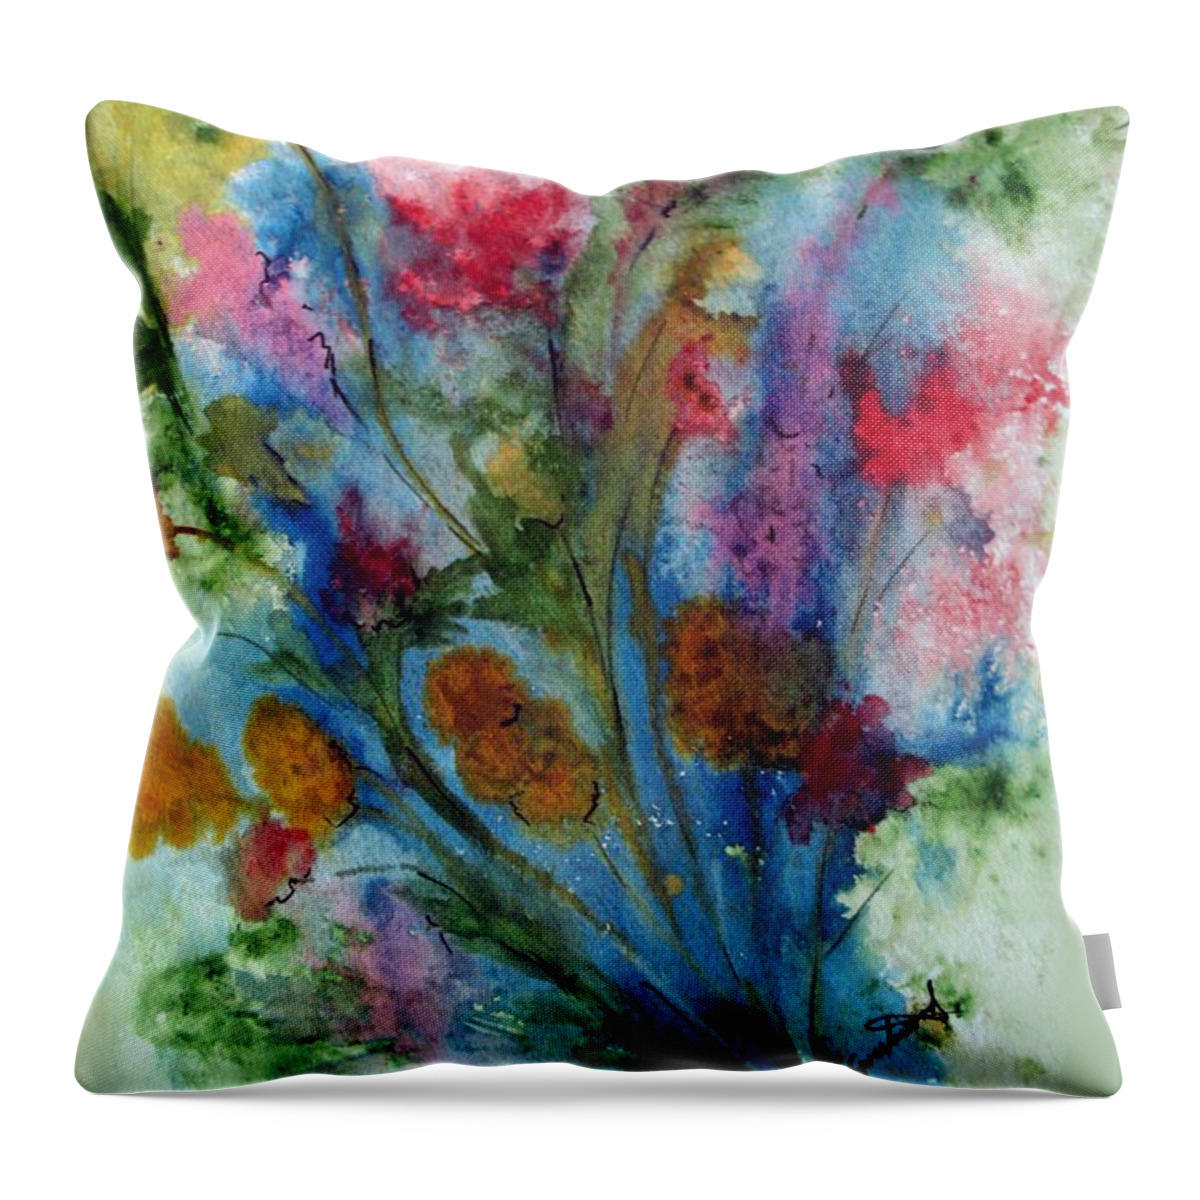 Floral Throw Pillow featuring the painting Watercolor Bouquet by Carol Sweetwood